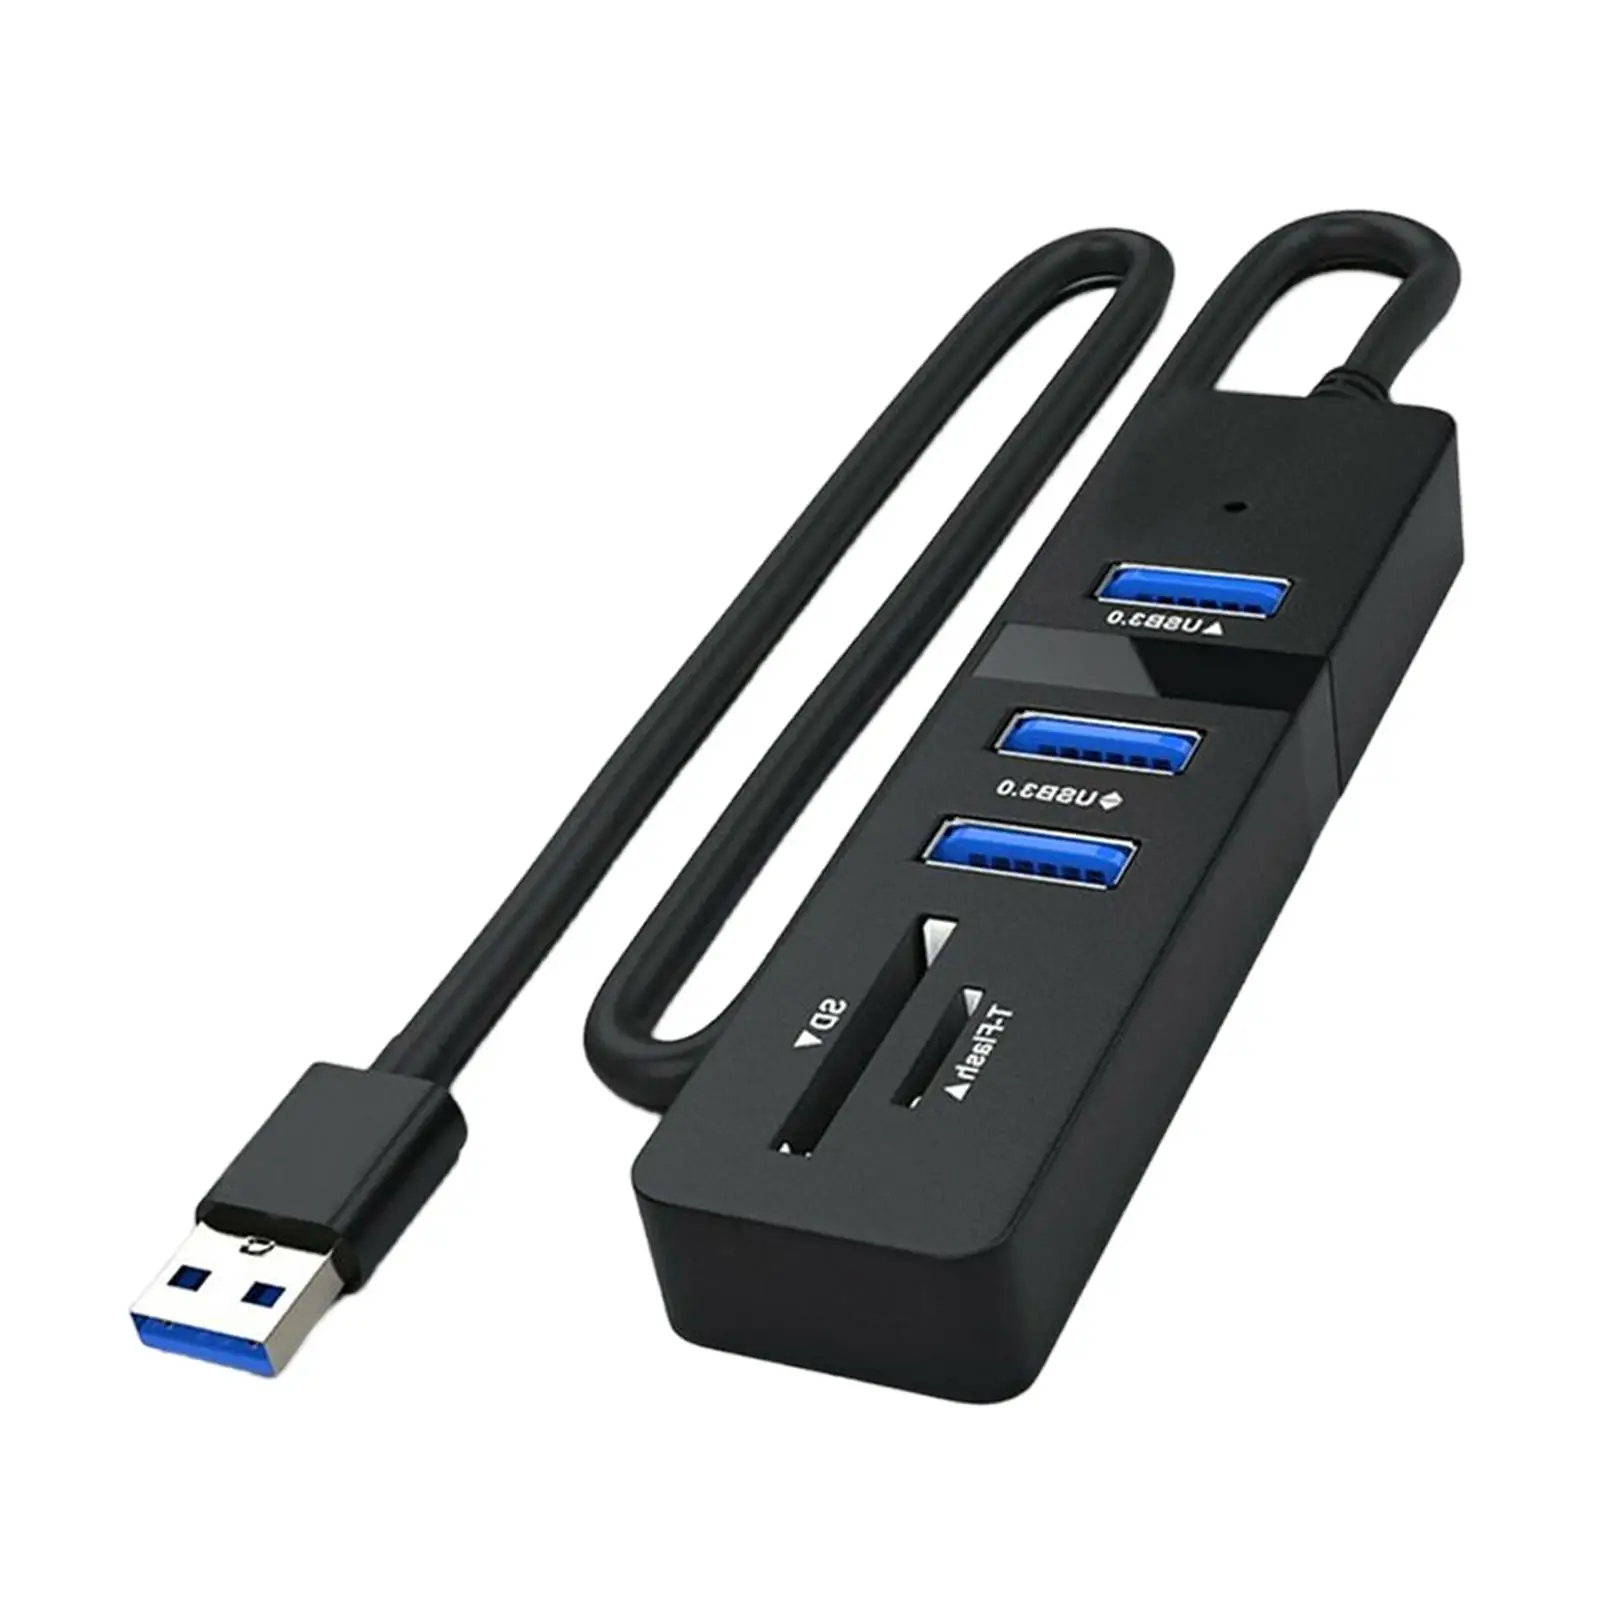 three ports USB 3.0 Hub Expansion Compact TF SD Card Slot Plug and easy to Set up Slim Adapter Data USB Hub for Laptop PC